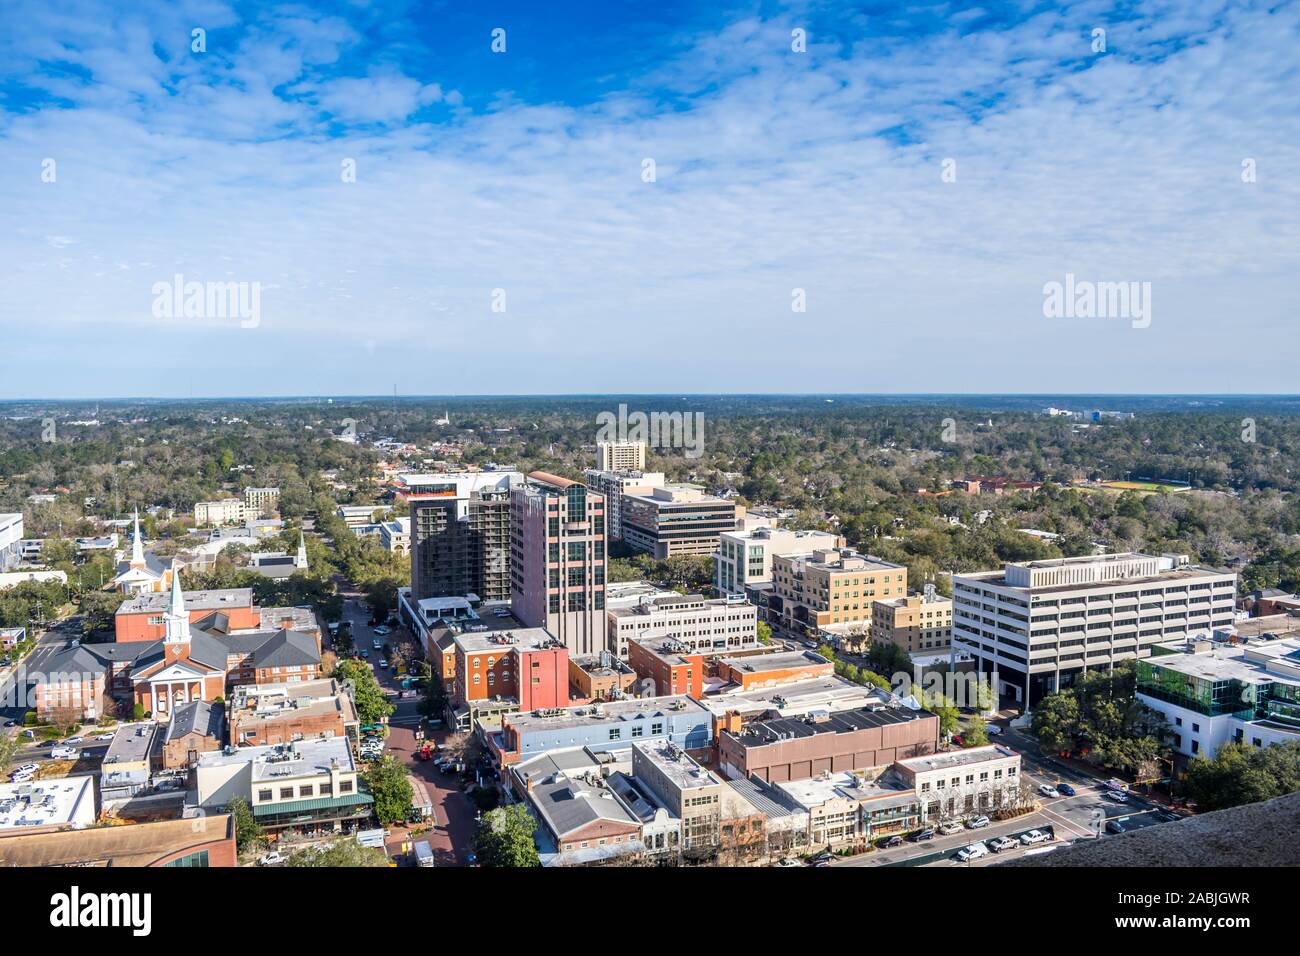 Tallahassee, FL, USA - Feb 15, 2019: An overlooking view of the prosperous city of Florida from atop Stock Photo